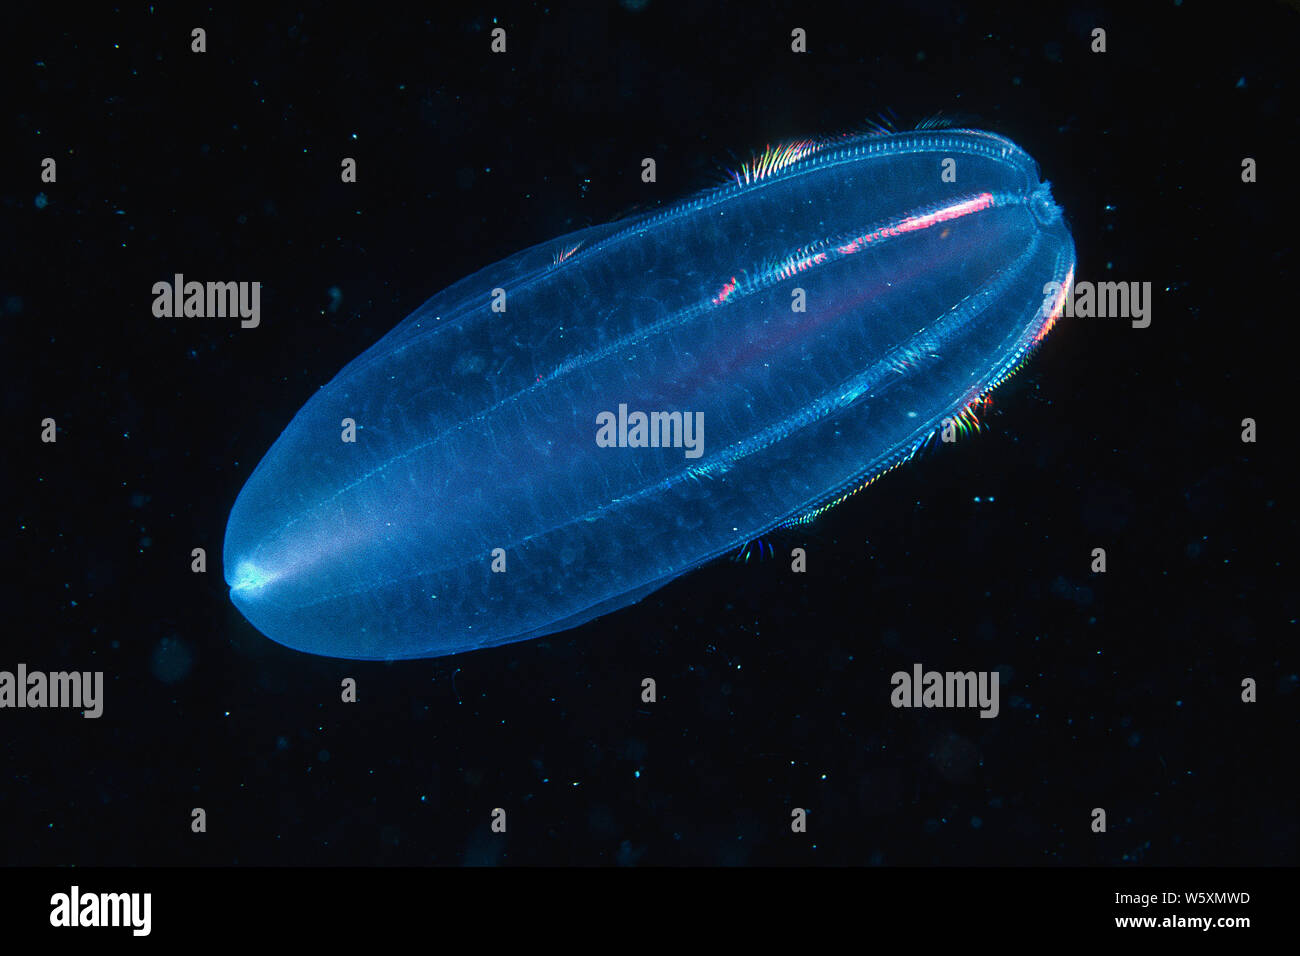 Comb jelly drifting underwater in the ocean water column Stock Photo